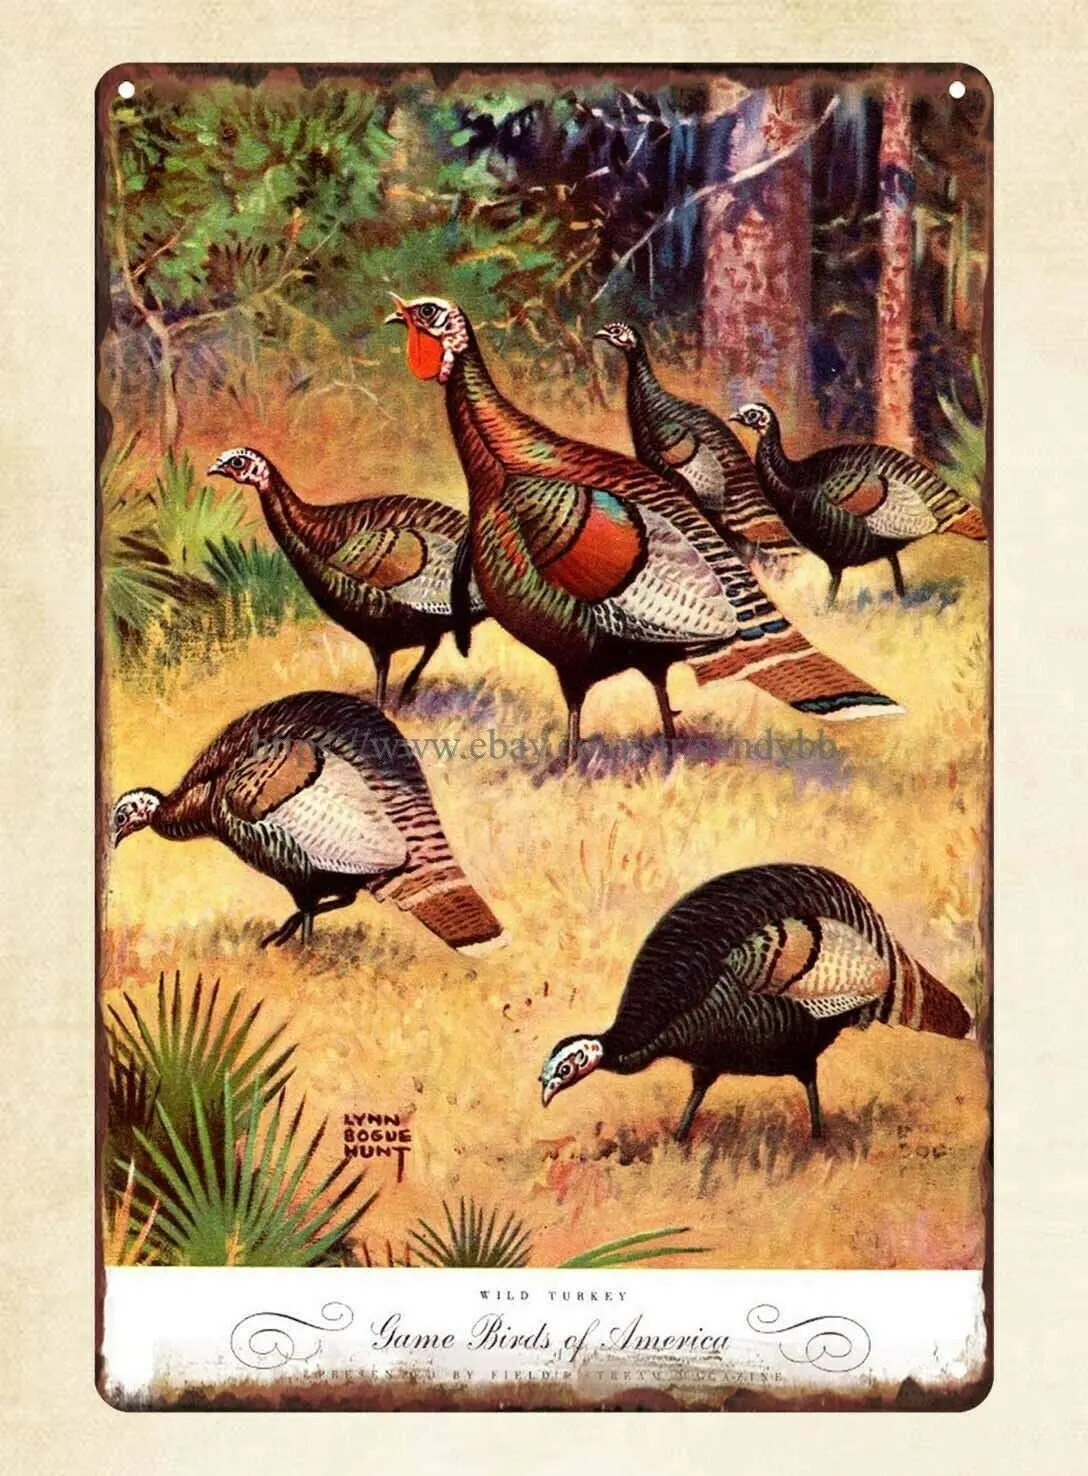 

Metal Tin Signs Unique Home Decor Game Birds of Amaerica Wild Turkey Wall Decor for Bars,Restaurants,cafes Pubs,8x12 Inch